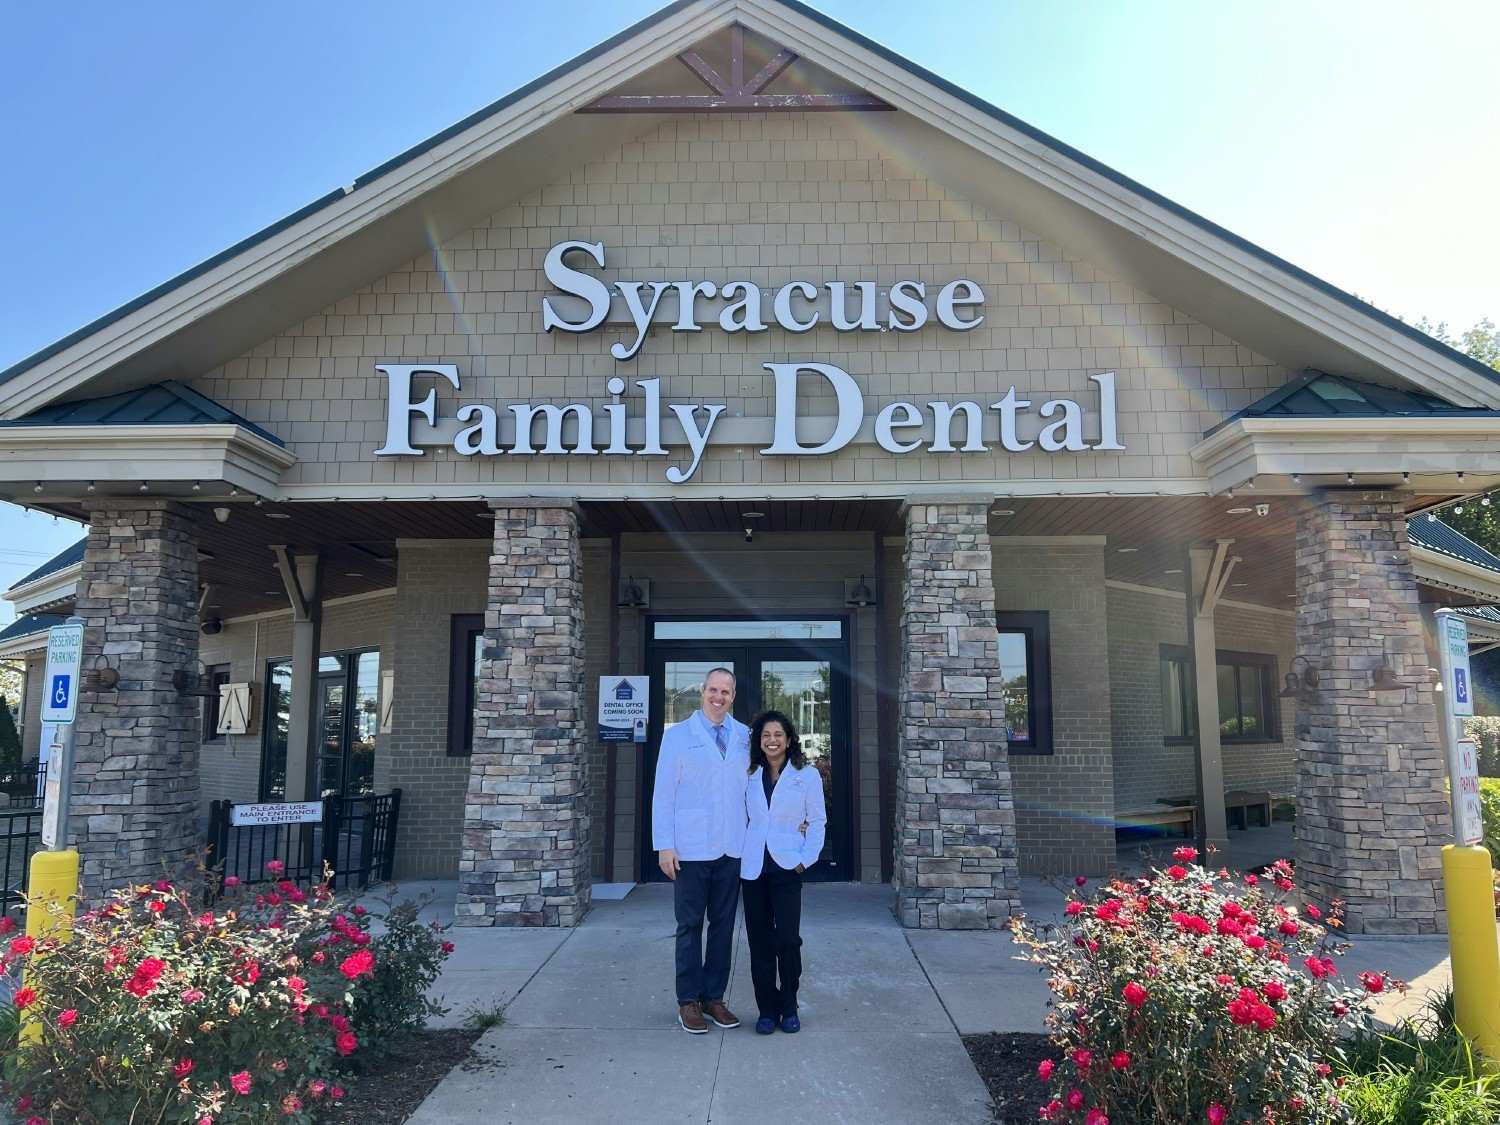 Our newest office, Syracuse Family Dental.